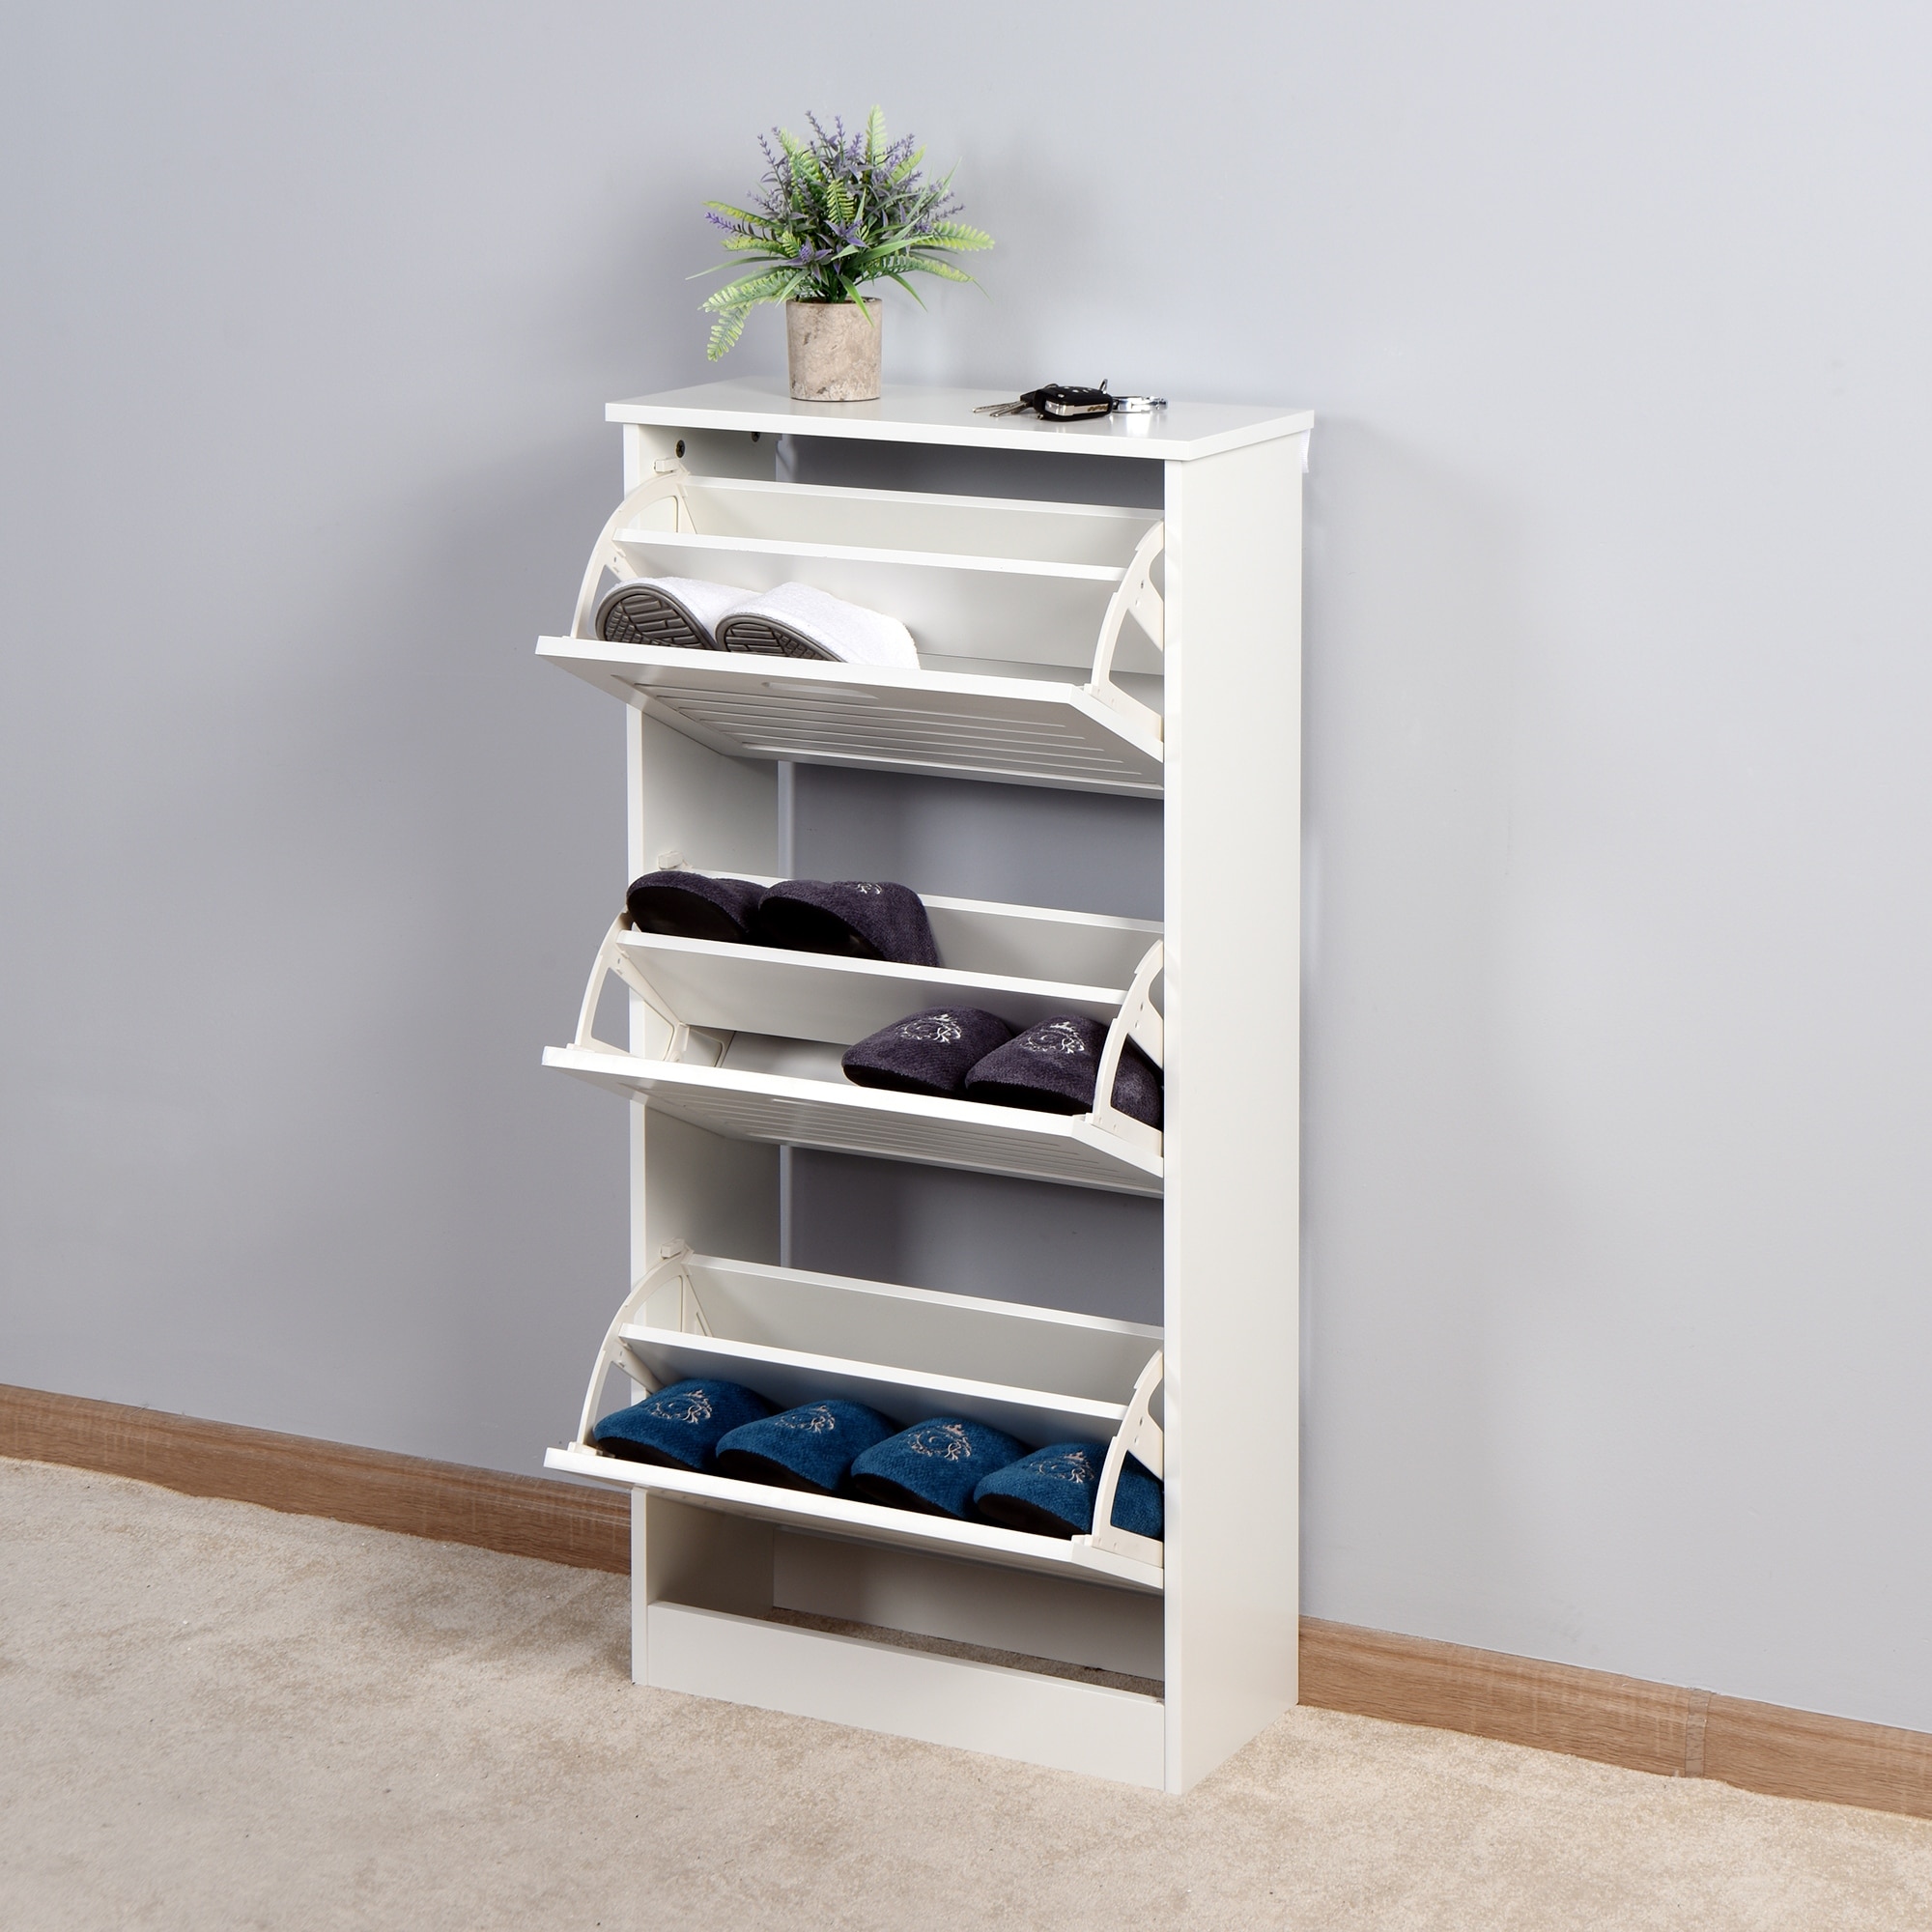 https://ak1.ostkcdn.com/images/products/is/images/direct/317c0b4a584036b02123ea8a55859b6d9196d917/Wood-3-Layers-Shoe-Organizer-Shoe-Storage-Cabinet.jpg